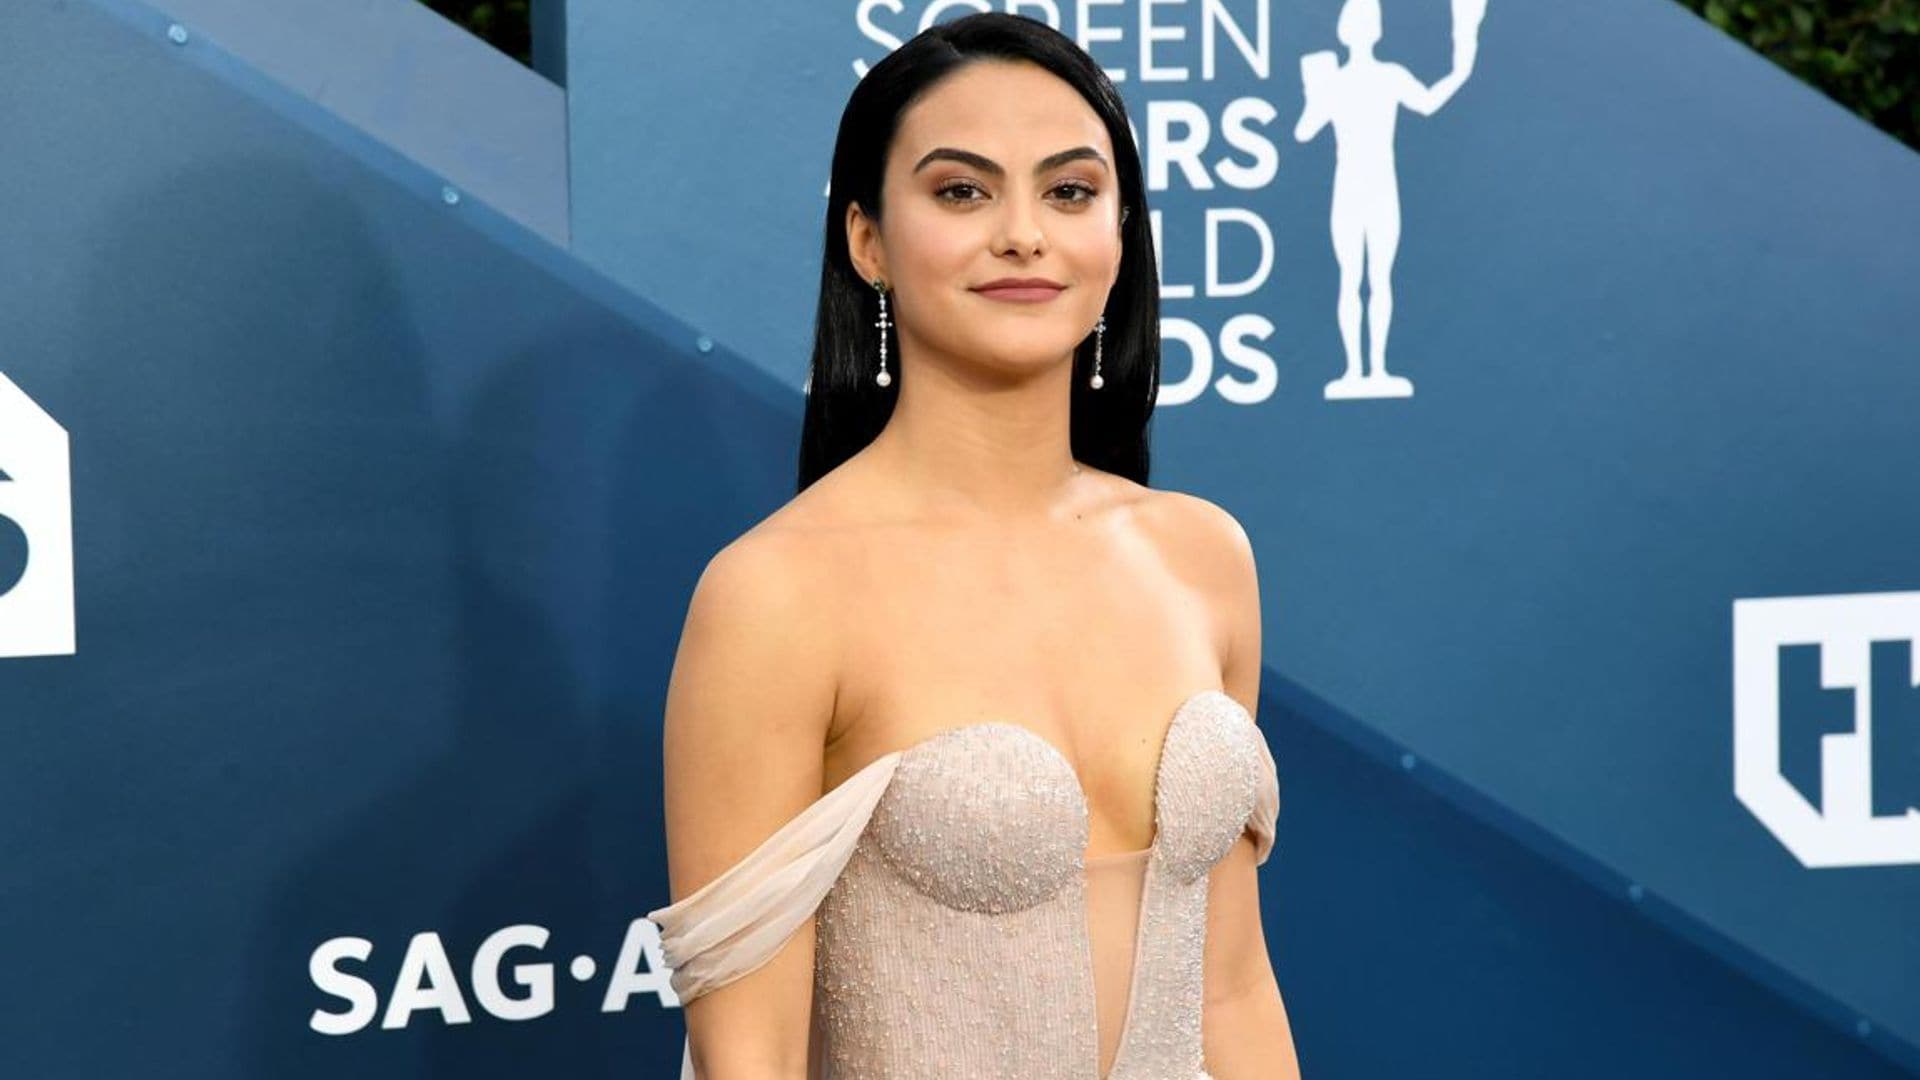 SAG Awards 2020: Camila Mendes, Margot Robbie and more, see the best red carpet looks